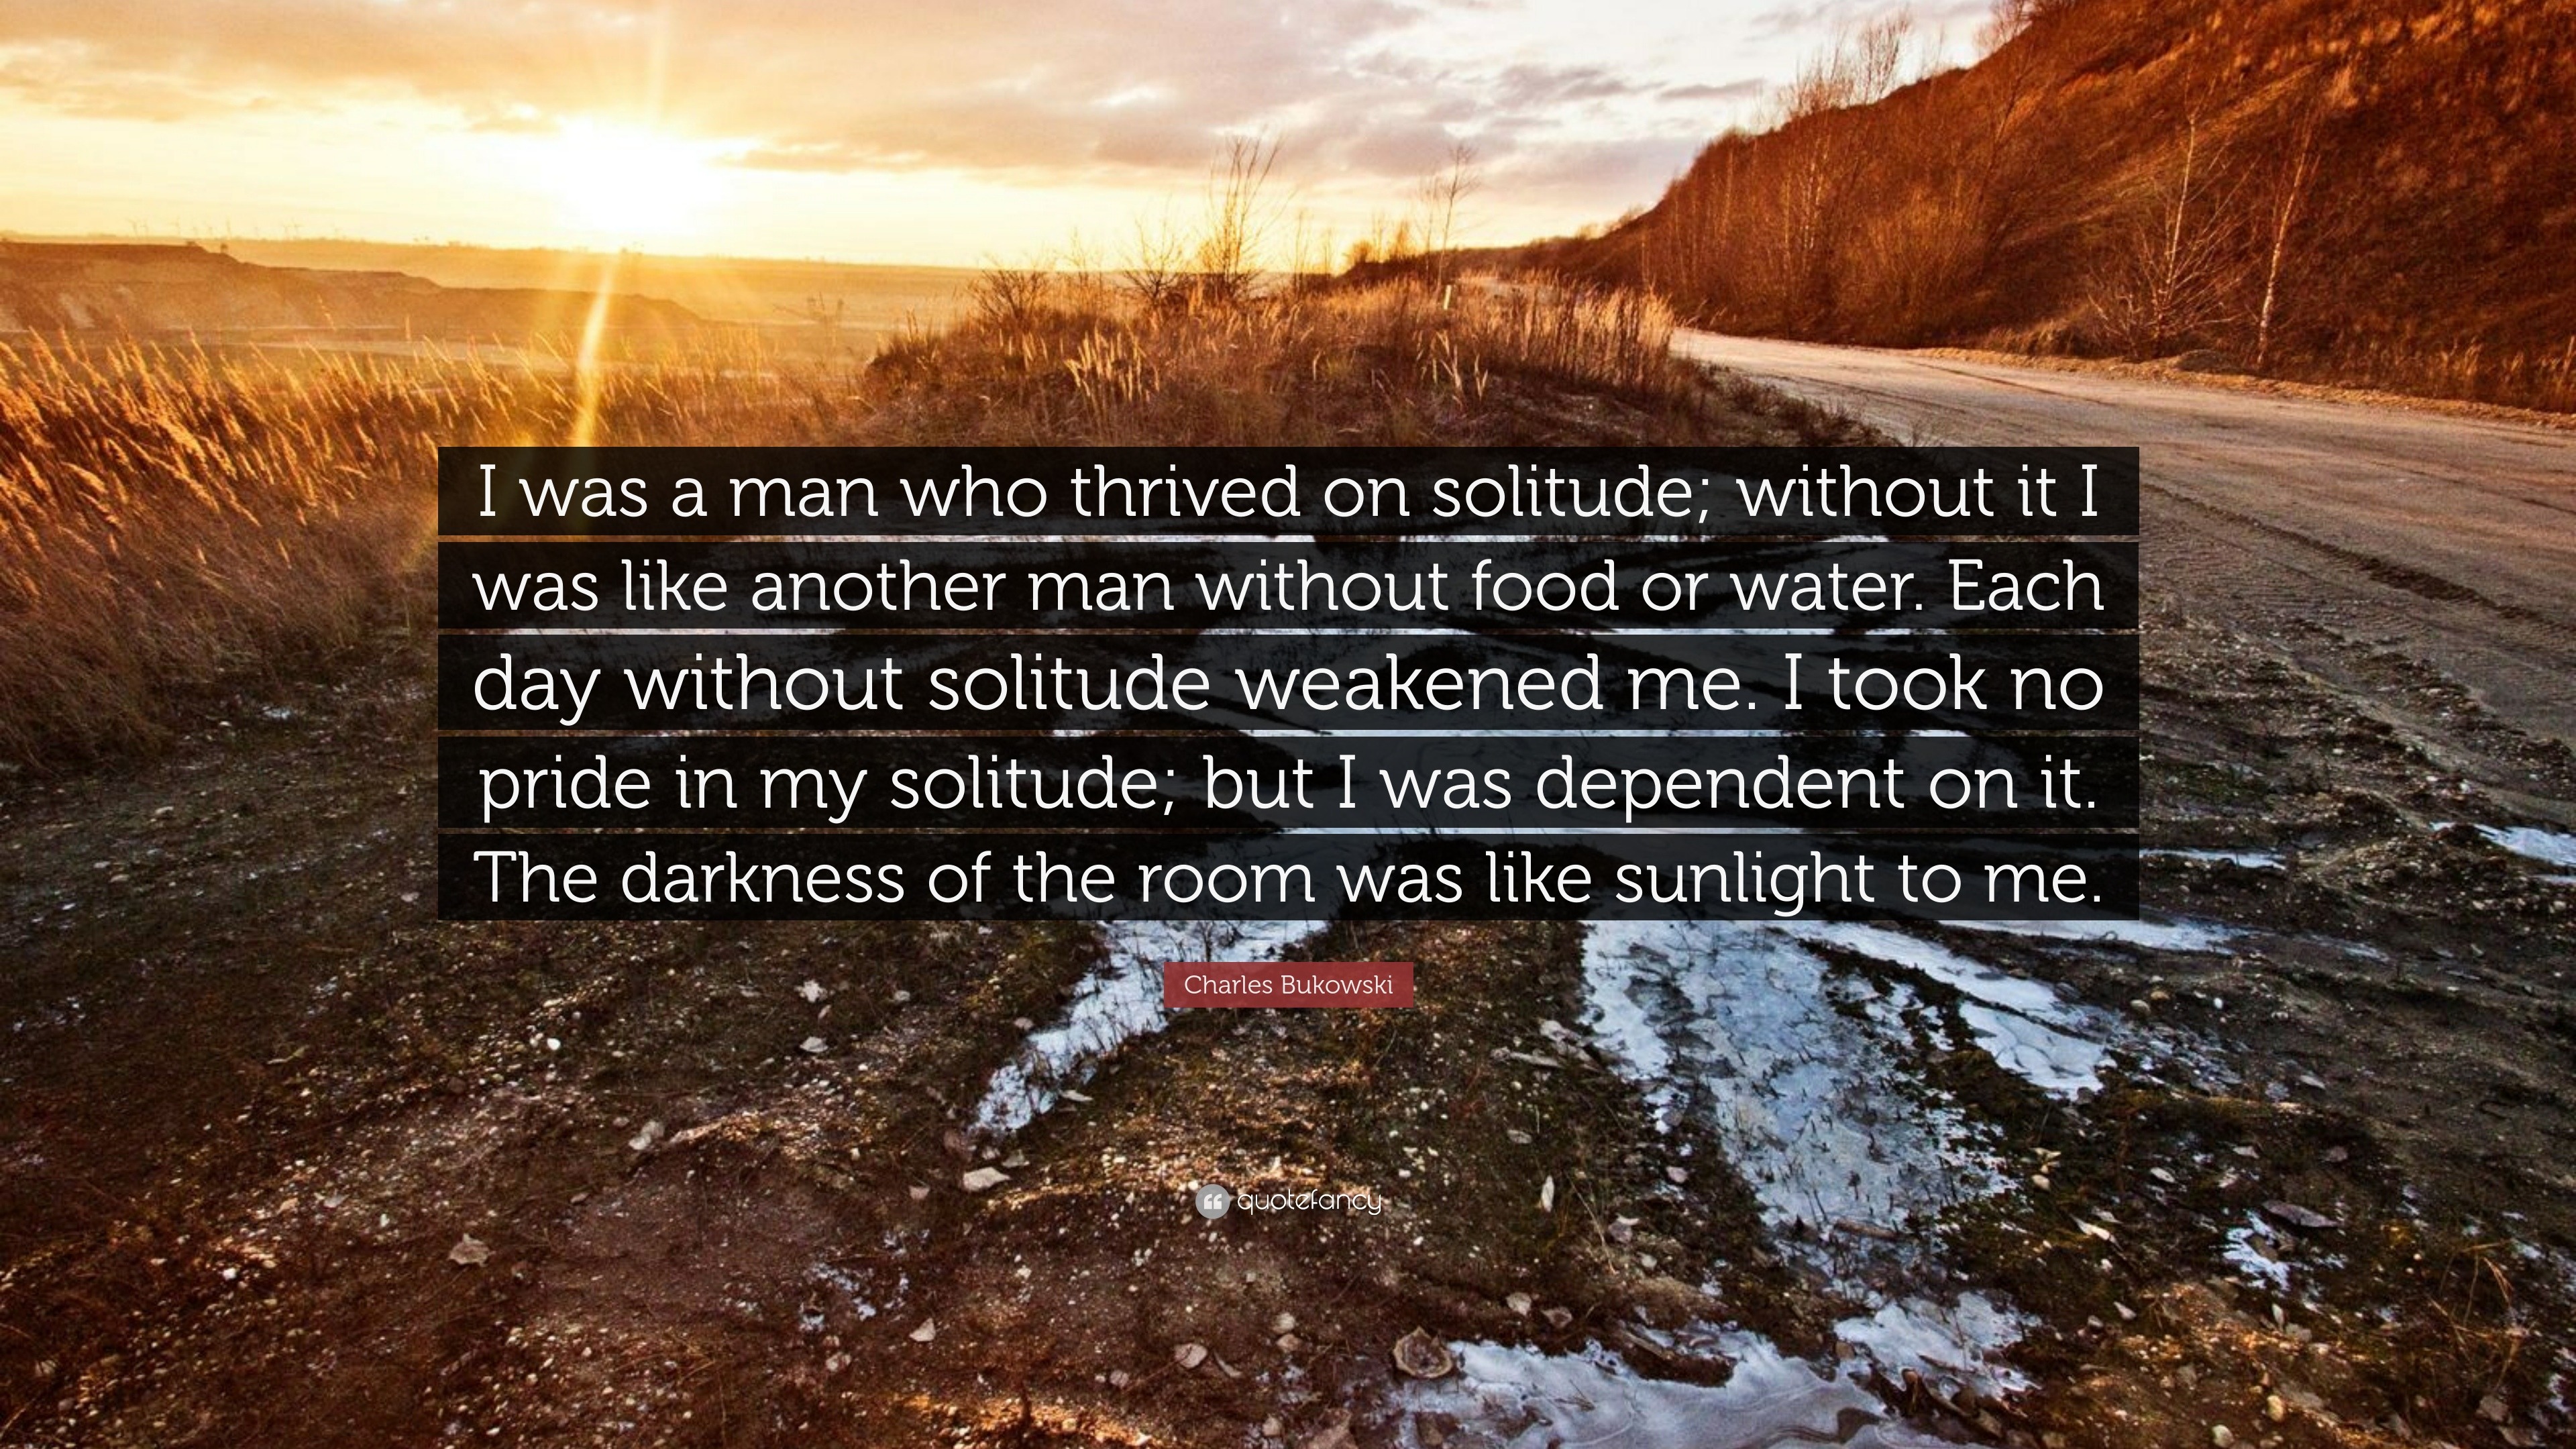 Charles Bukowski Quote: “I was a man who thrived on solitude; without it I  was like another man without food or water. Each day without solitude ”